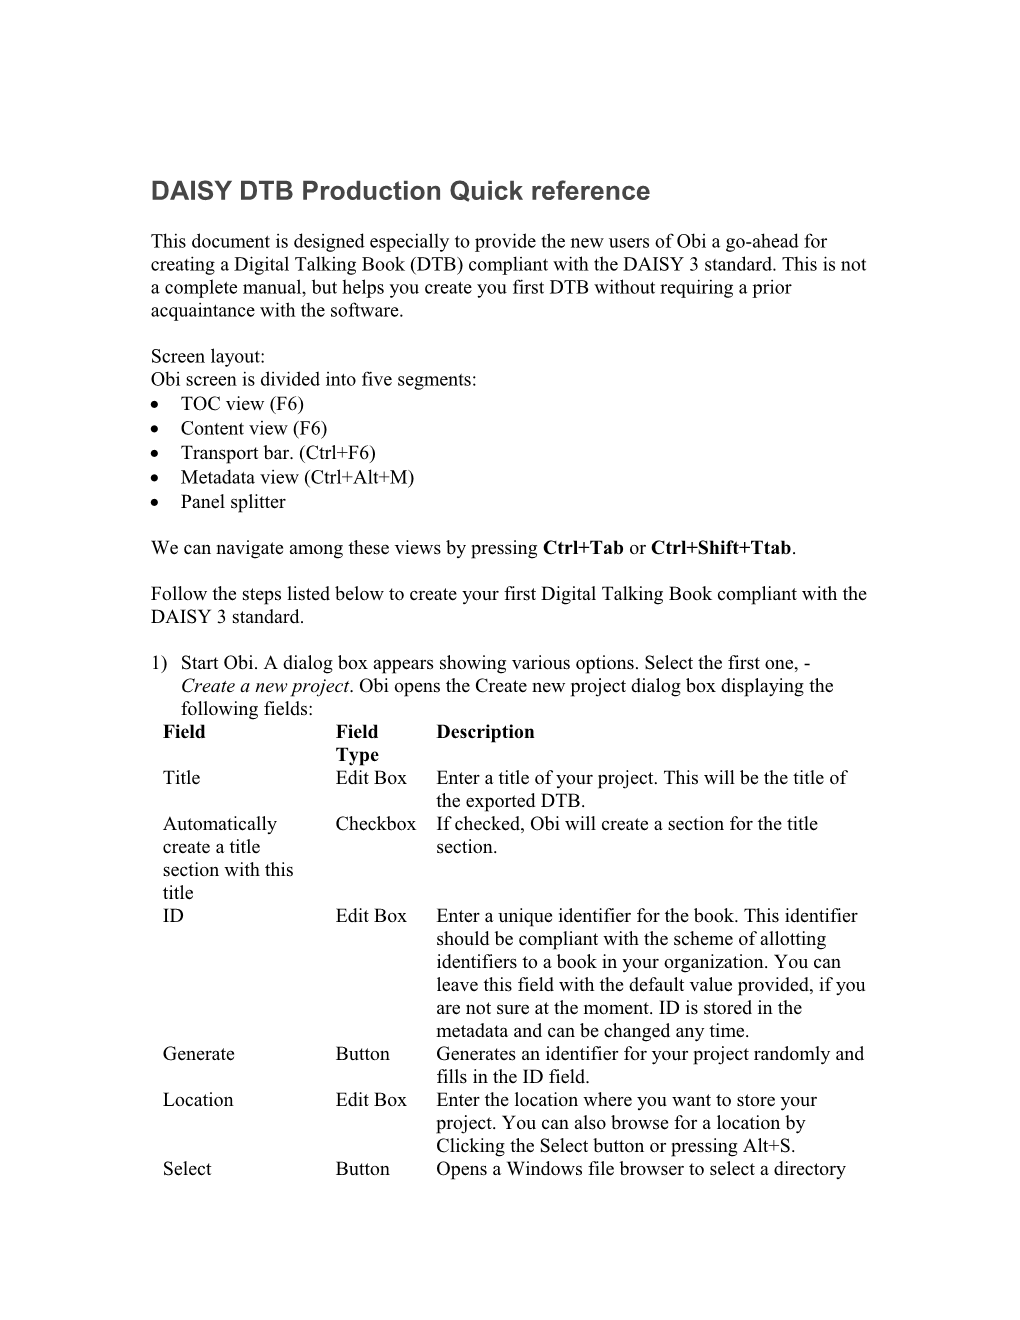 DAISY DTB Production Quick Reference